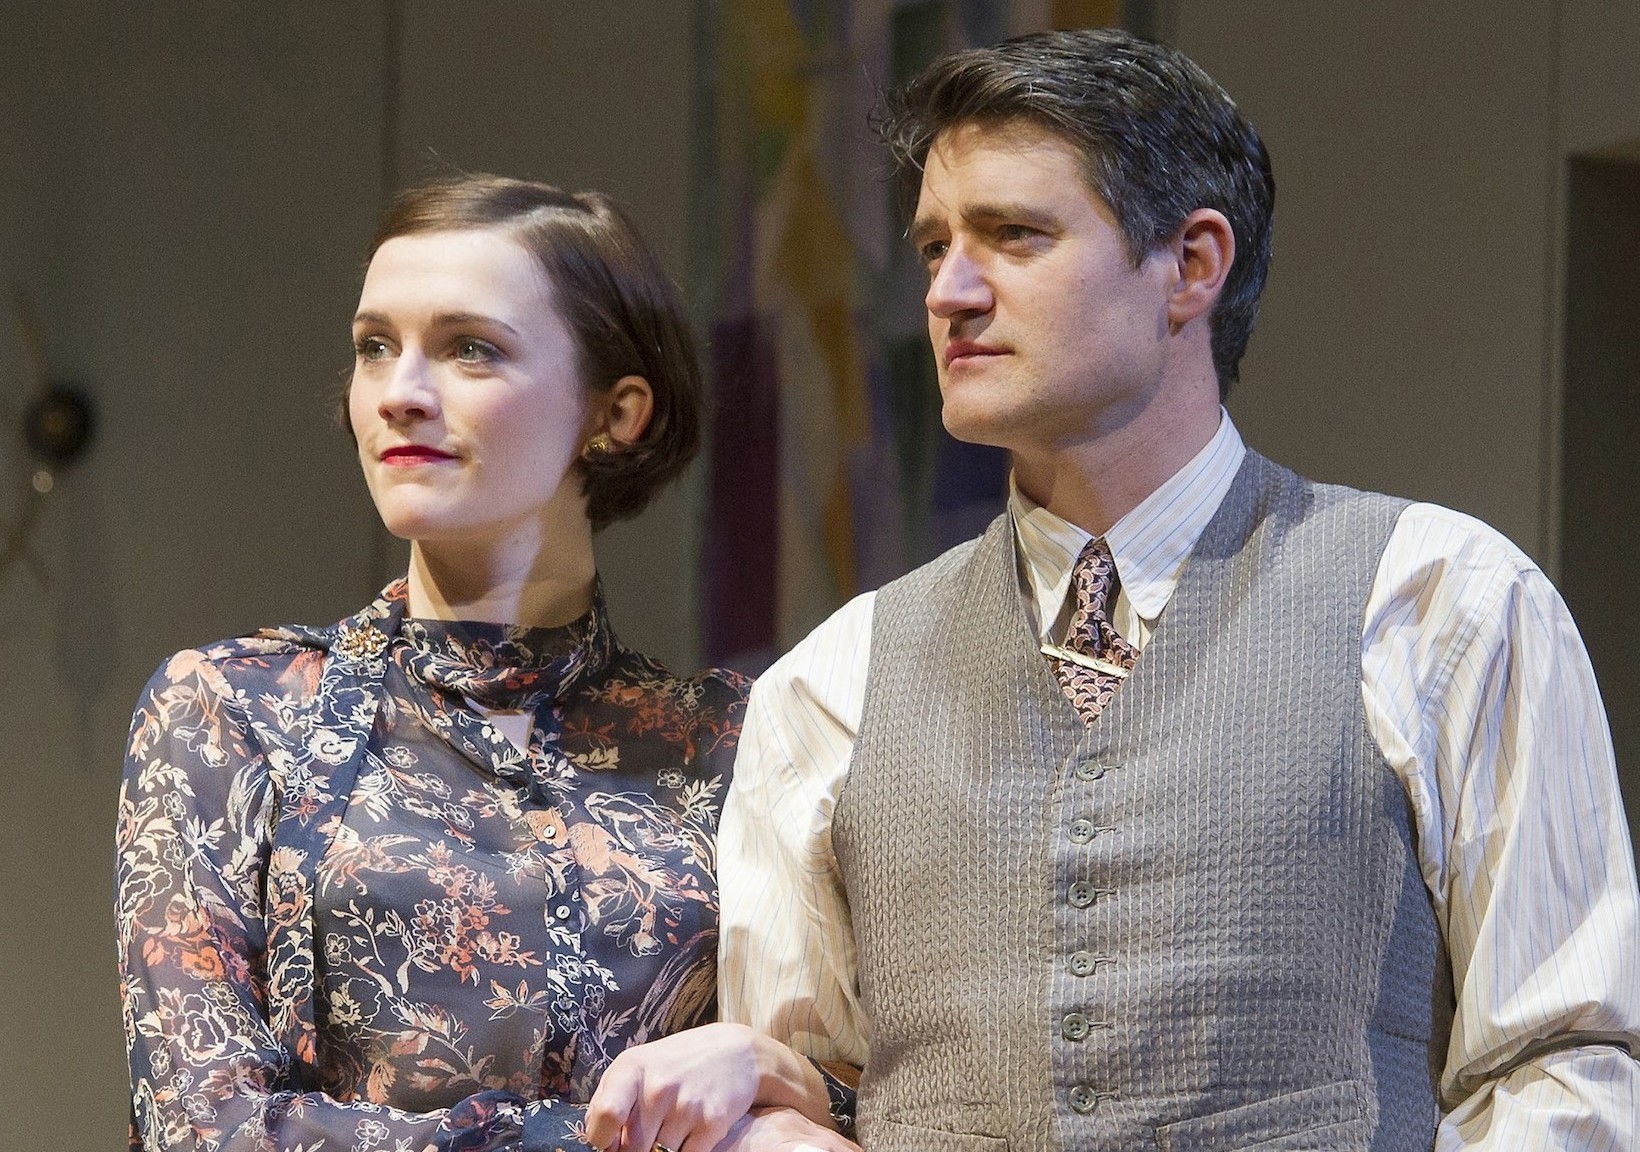 Charlotte Ritchie tours UK theatres in a play called 'Private Lives' (Alastair Muir)